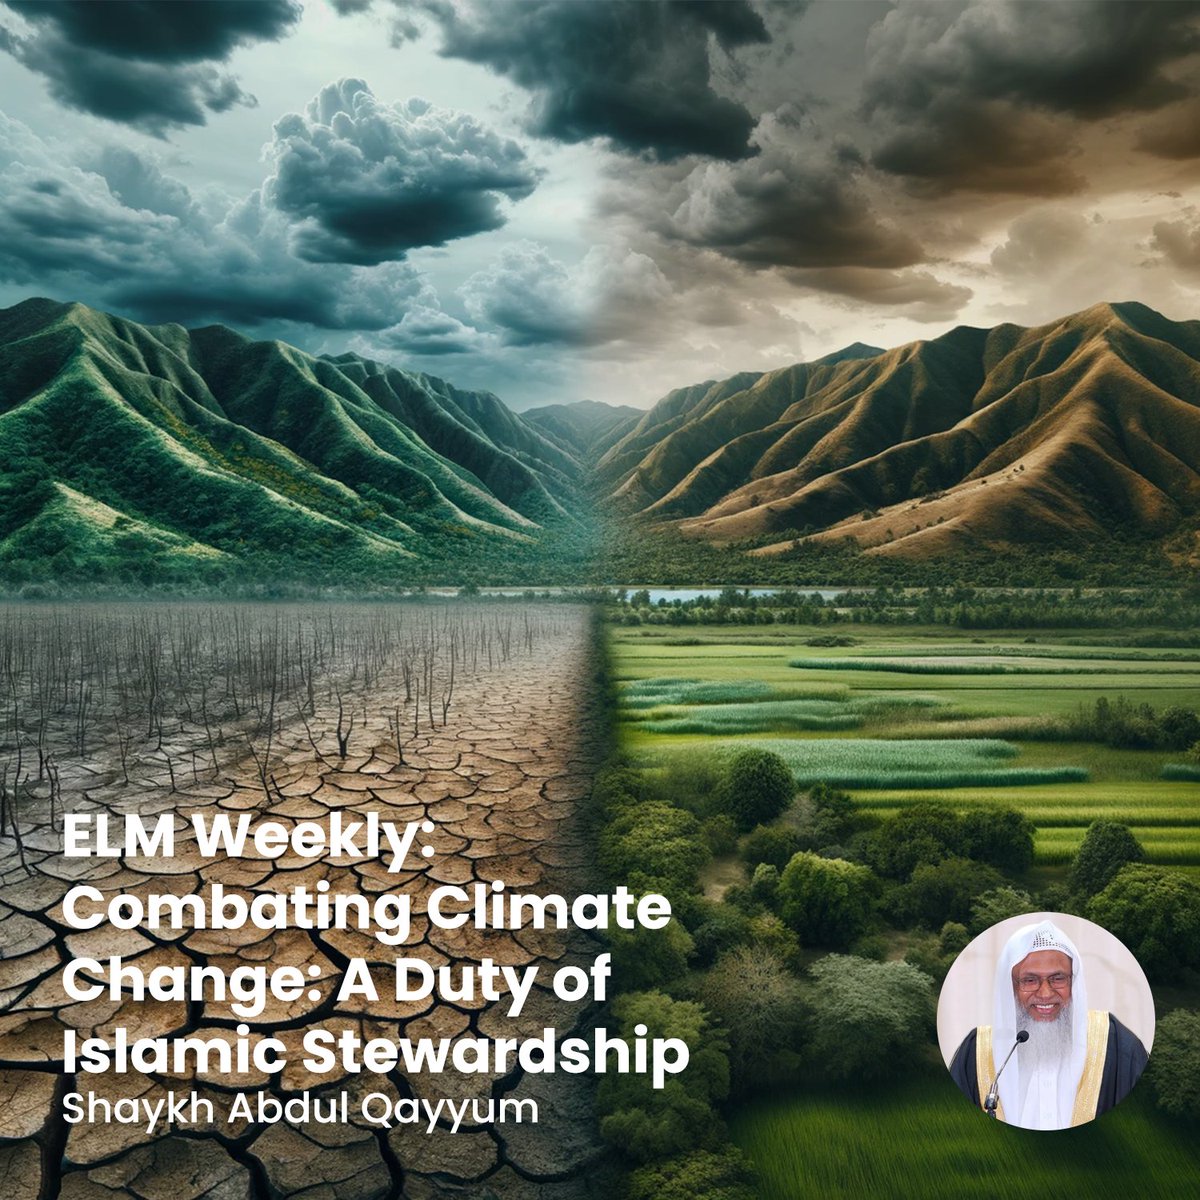 🕌✨ Don’t miss this week important khutbah on climate change and environmental disaster. 

🔗 Read more: ttps://www.eastlondonmosque.org.uk/blog/climate-change-a-duty-of-islamic-stewardship

#EastLondonMosque #ClimateChange #EnvironmentalStewardship  #FaithAndNature